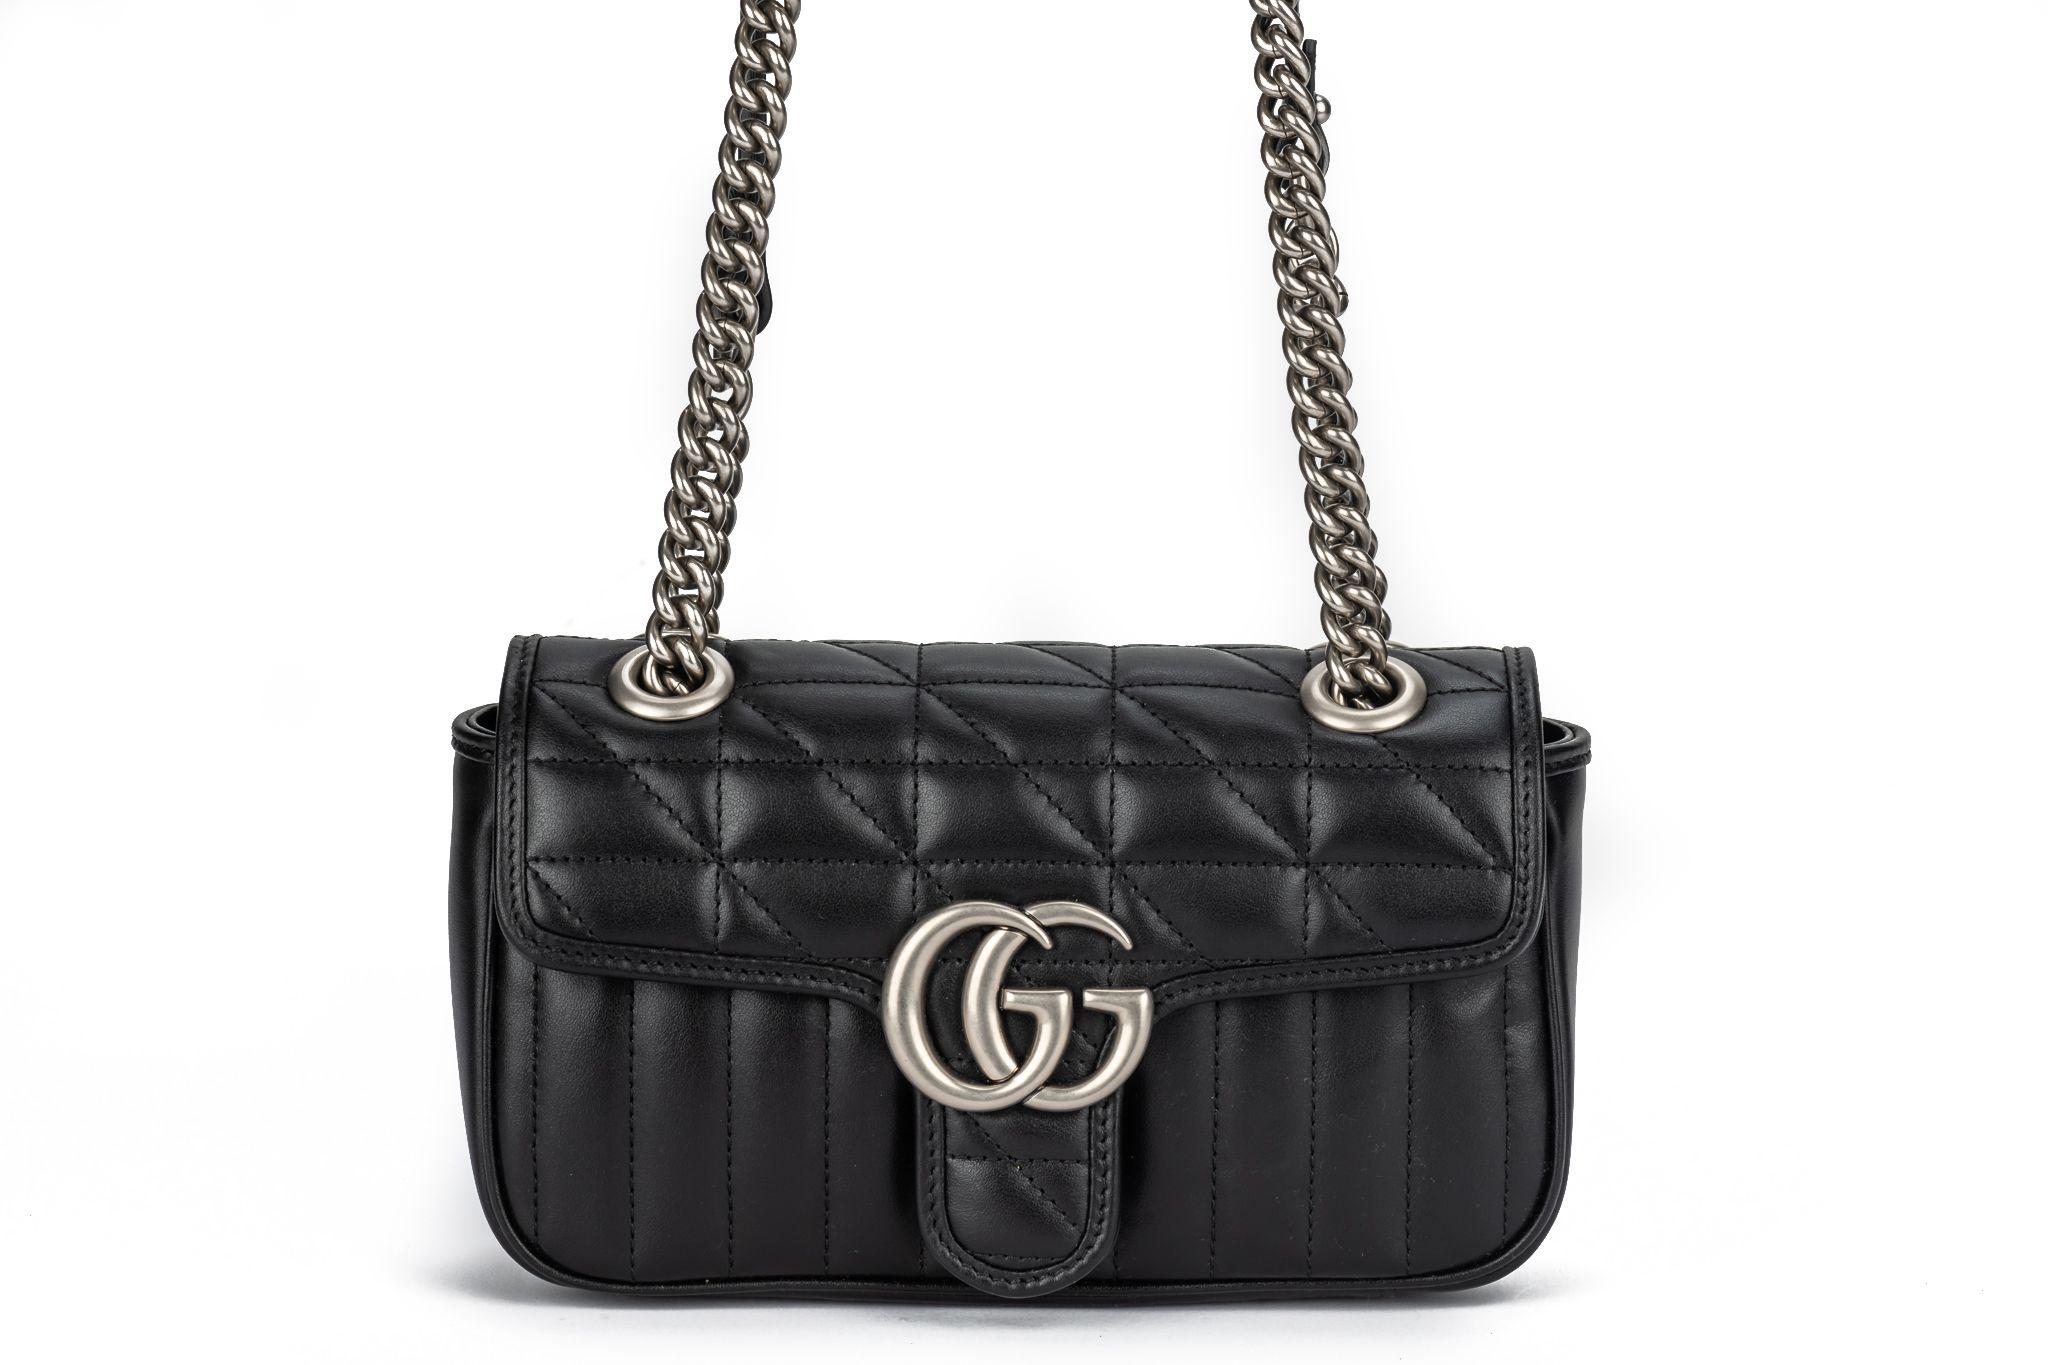 Black Gucci New Marmont Small Shoulder Bag For Sale